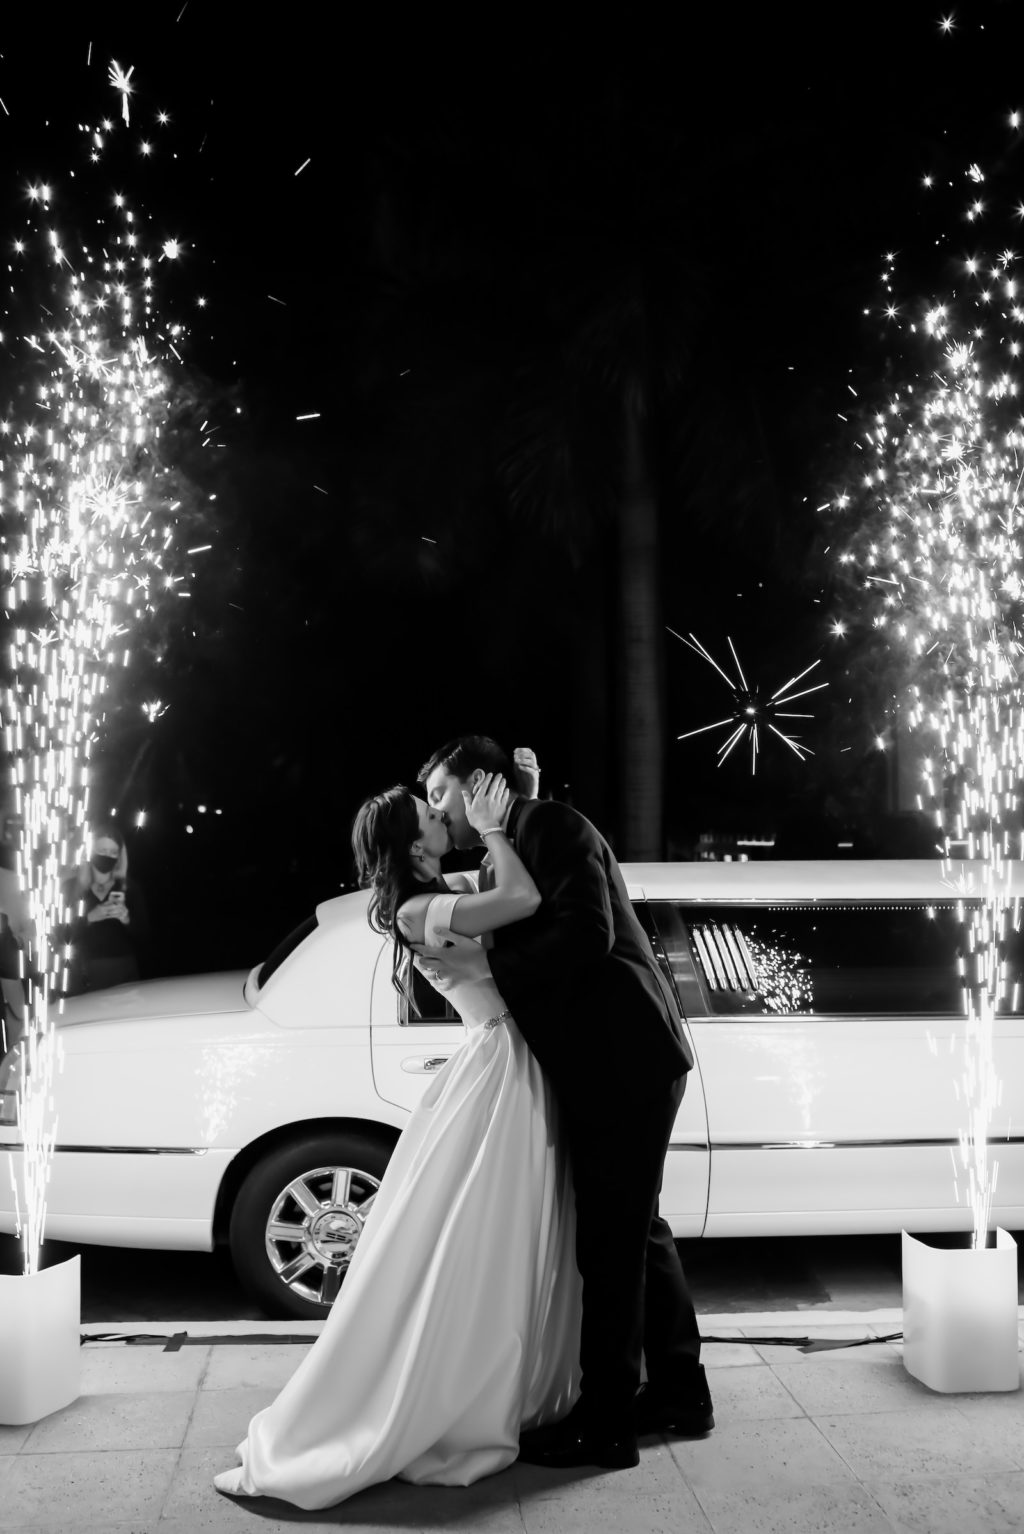 Elegant Classic Bride and Groom Kissing Sparkler Wedding Exit Black and White Photo | Tampa Bay Wedding Photographer Lifelong Photography Studio